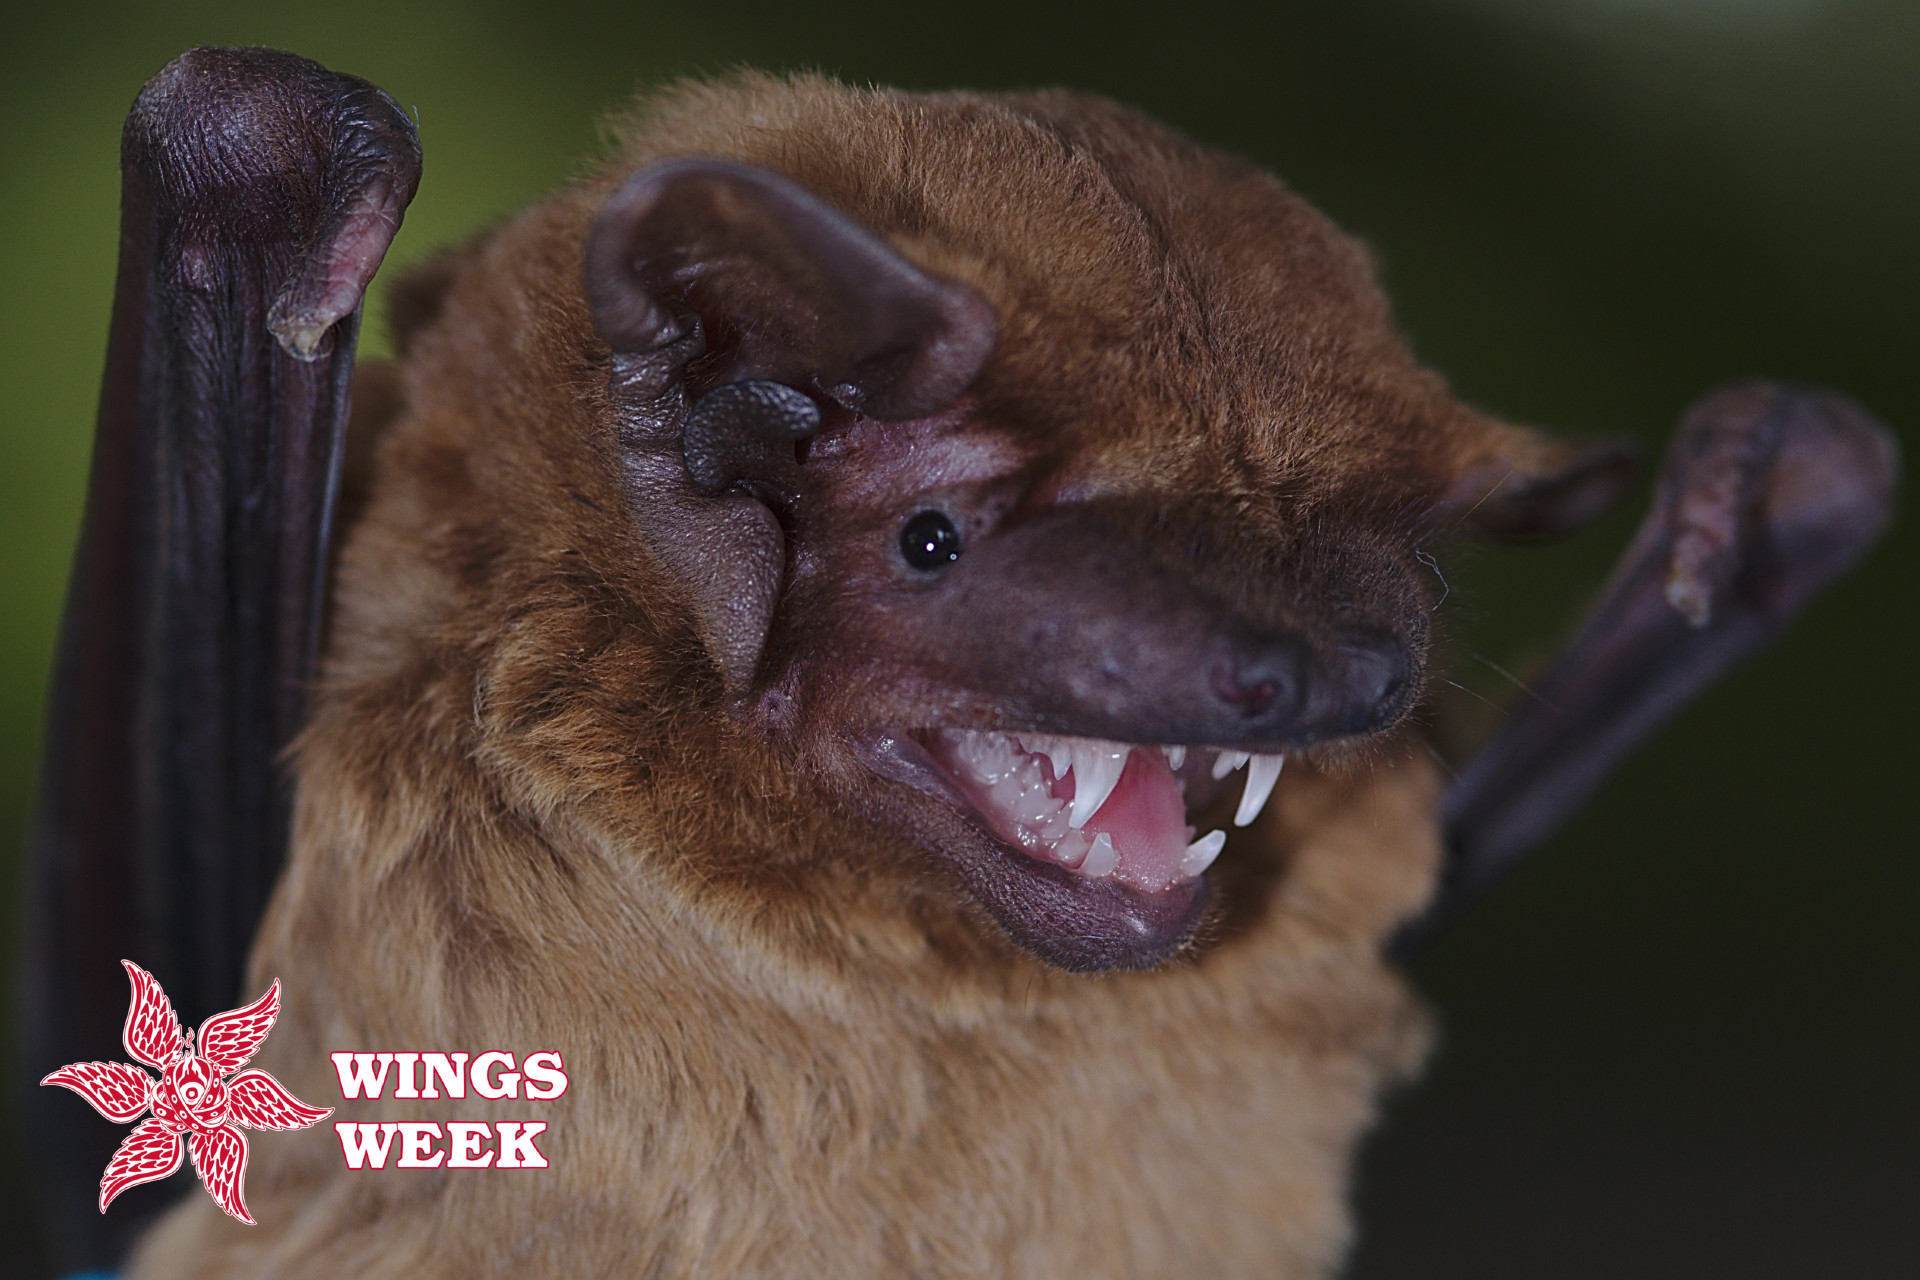 a close-up of a male common noctule bat against a dark background. the wings week logo is in the leftmost corner